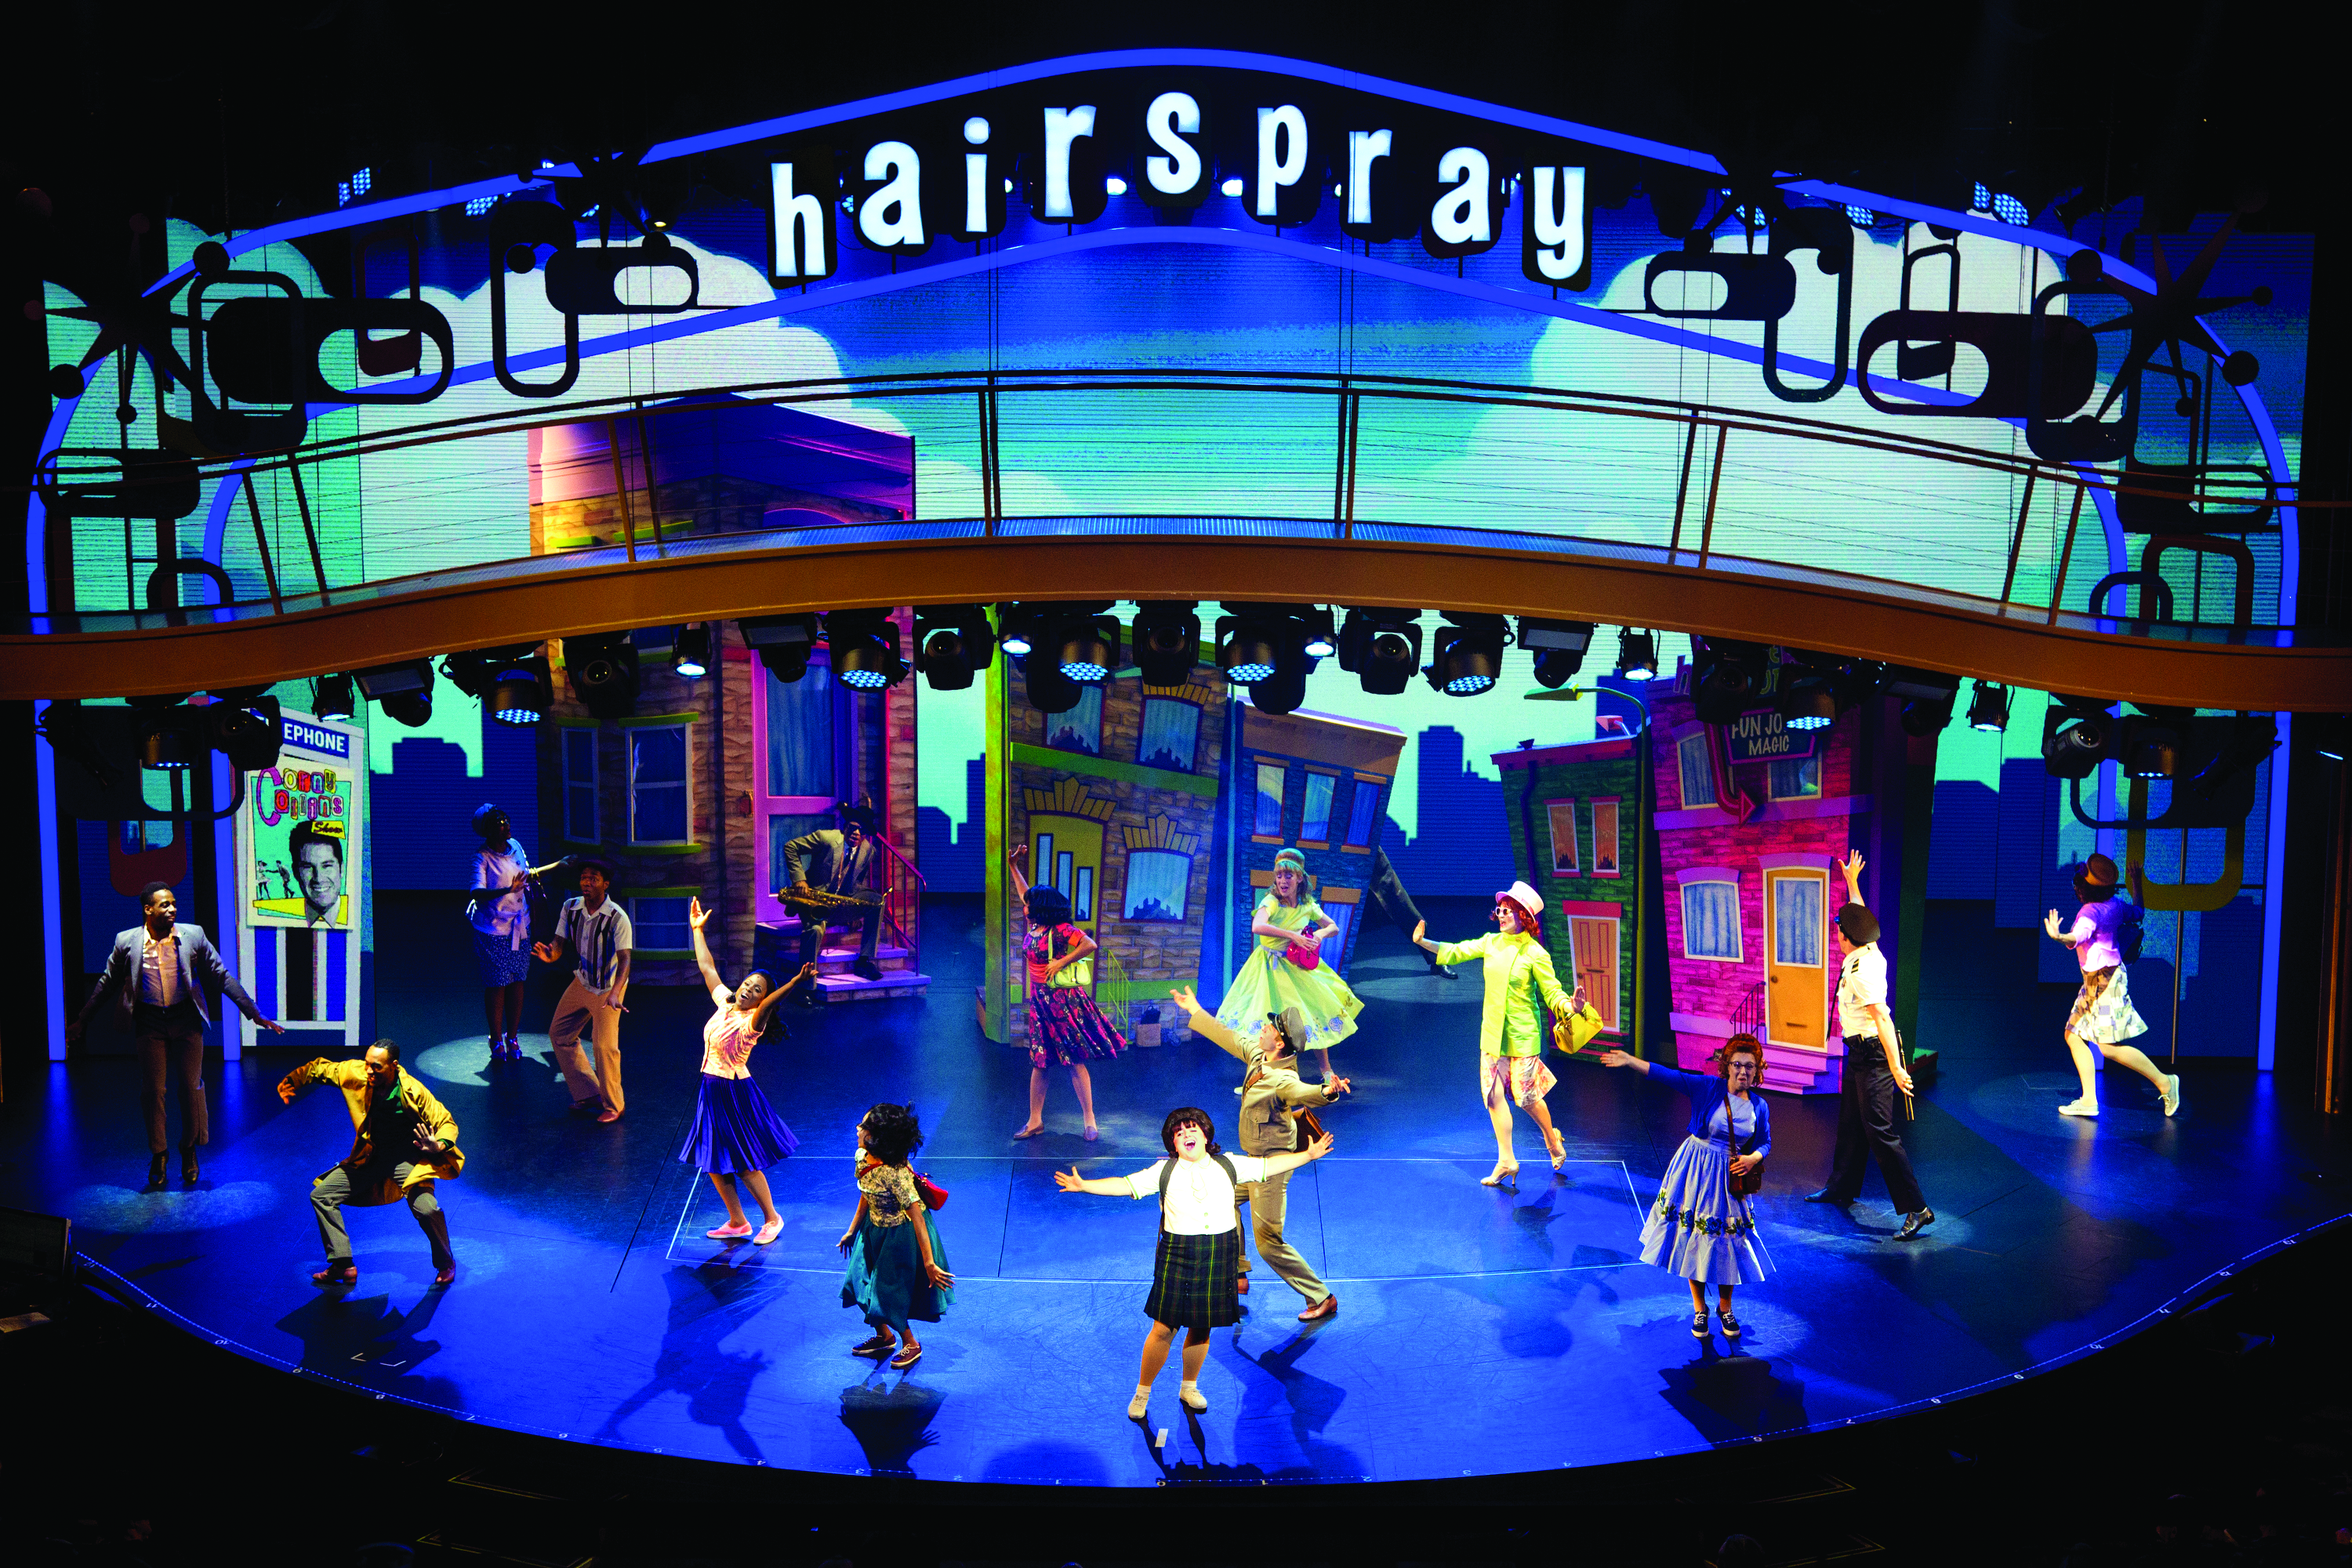 SY, Symphony of the Seas, Hairspray, Entertainment Place, performance, performers, Broadway, Play, Actress, Actor, Theater, Dancing, singing cast, singers, scenery, Hairspray signage lit up above stage, wide view of stage,